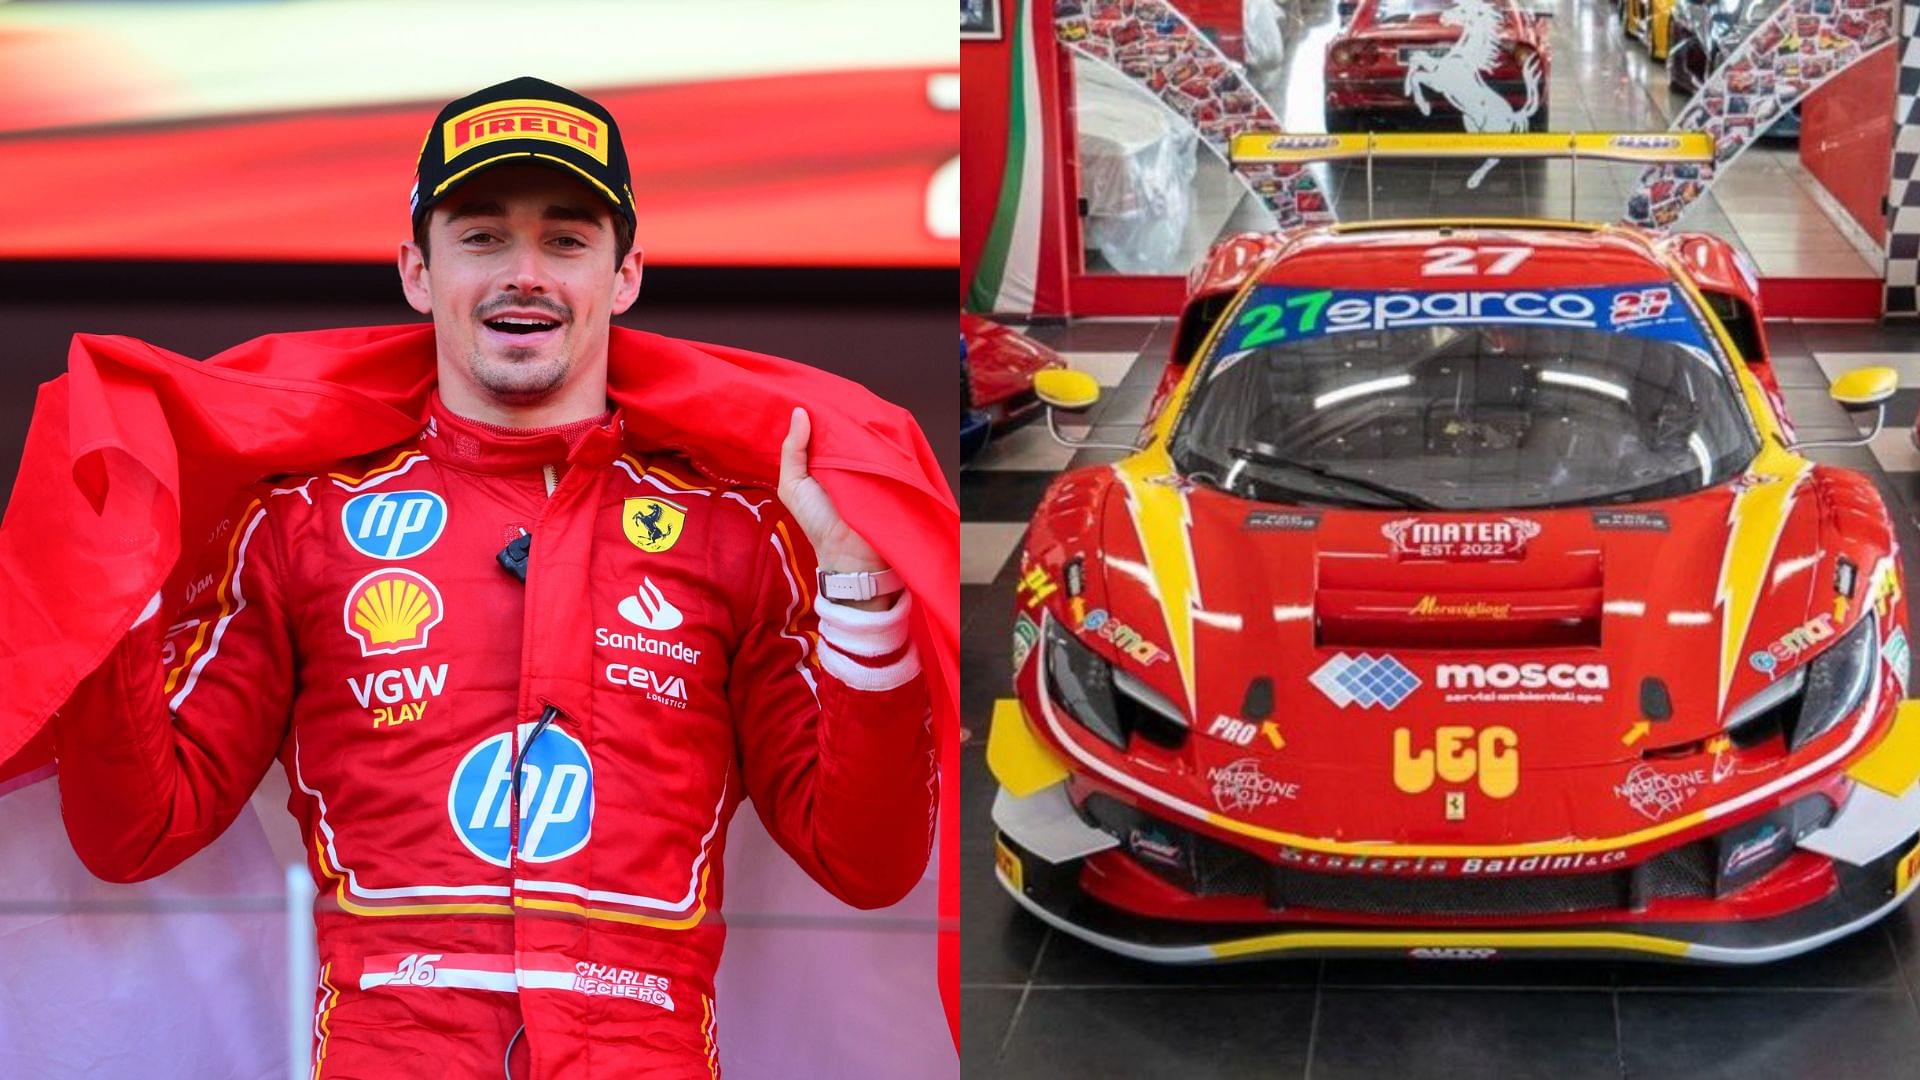 LEC for LEC? Charles Leclerc Spends Big Bucks to Sponsor His Brother's Racing